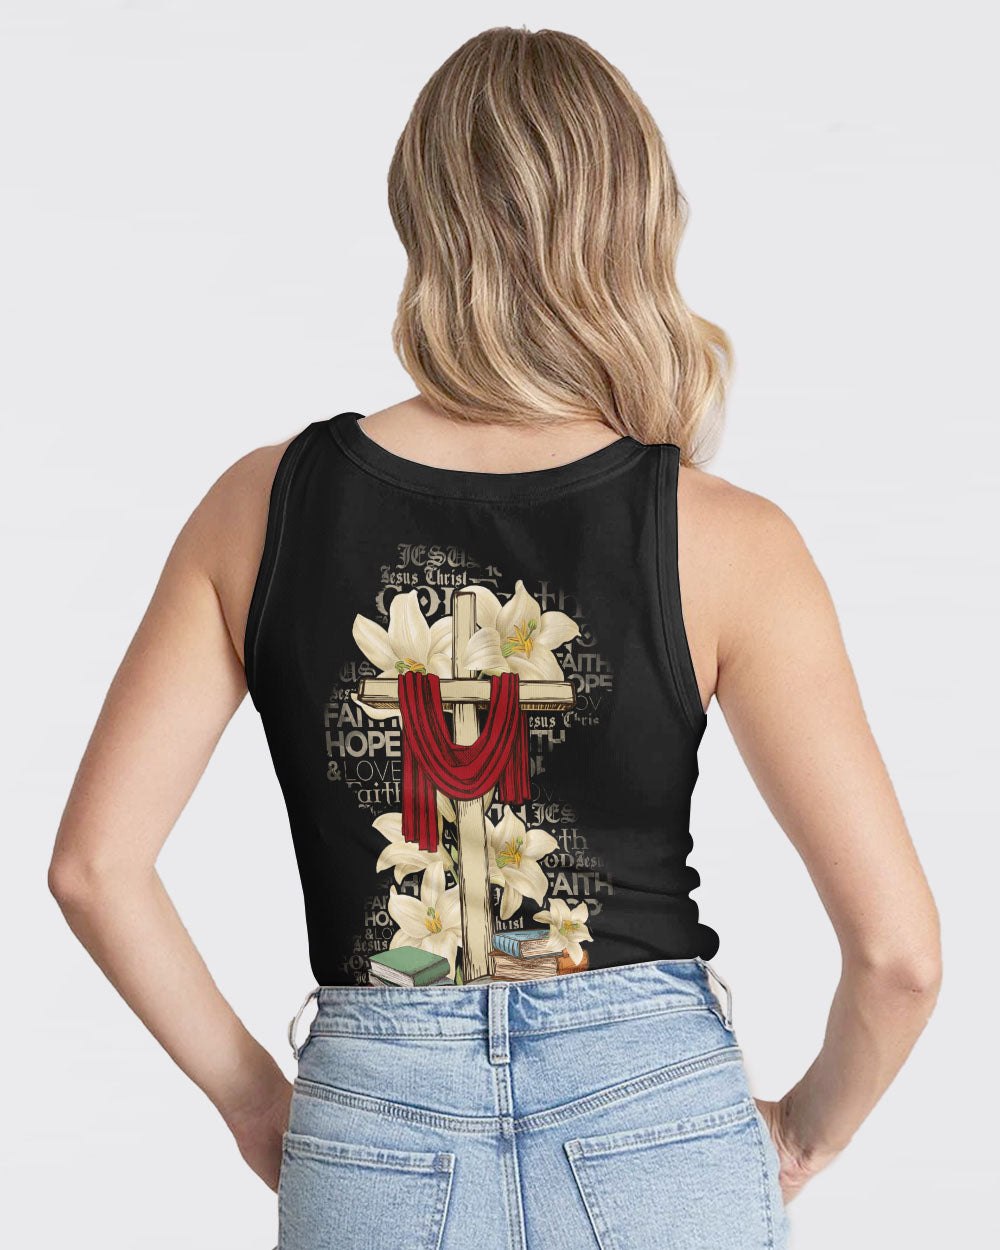 Lily Flower And Cross Book Women's Christian Tanks